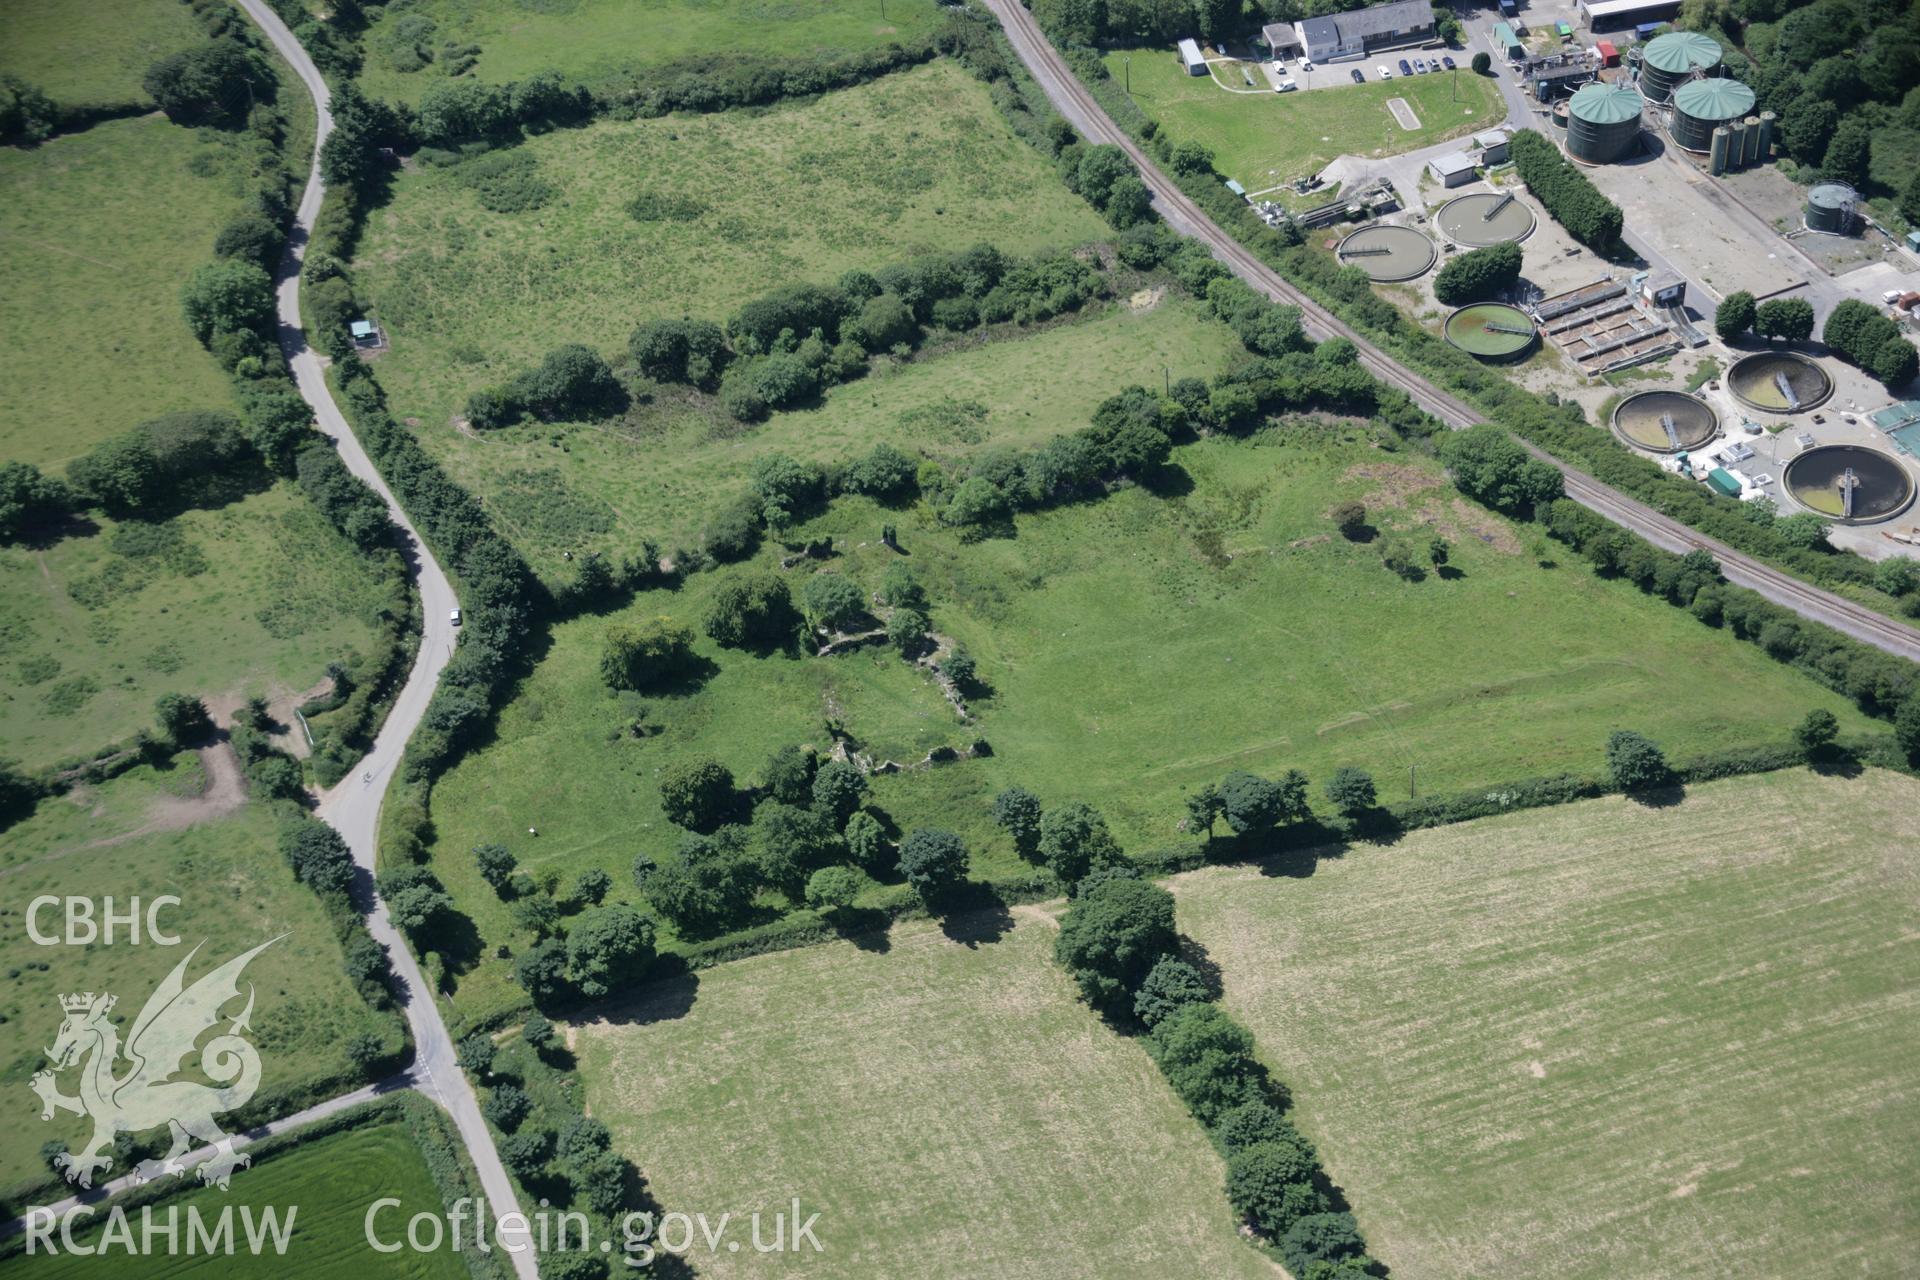 RCAHMW colour oblique aerial photograph of Haroldston House Garden Earthworks, Haverfordwest, with the Royal Commission's survey in progress, from the east. Taken on 22 June 2005 by Toby Driver